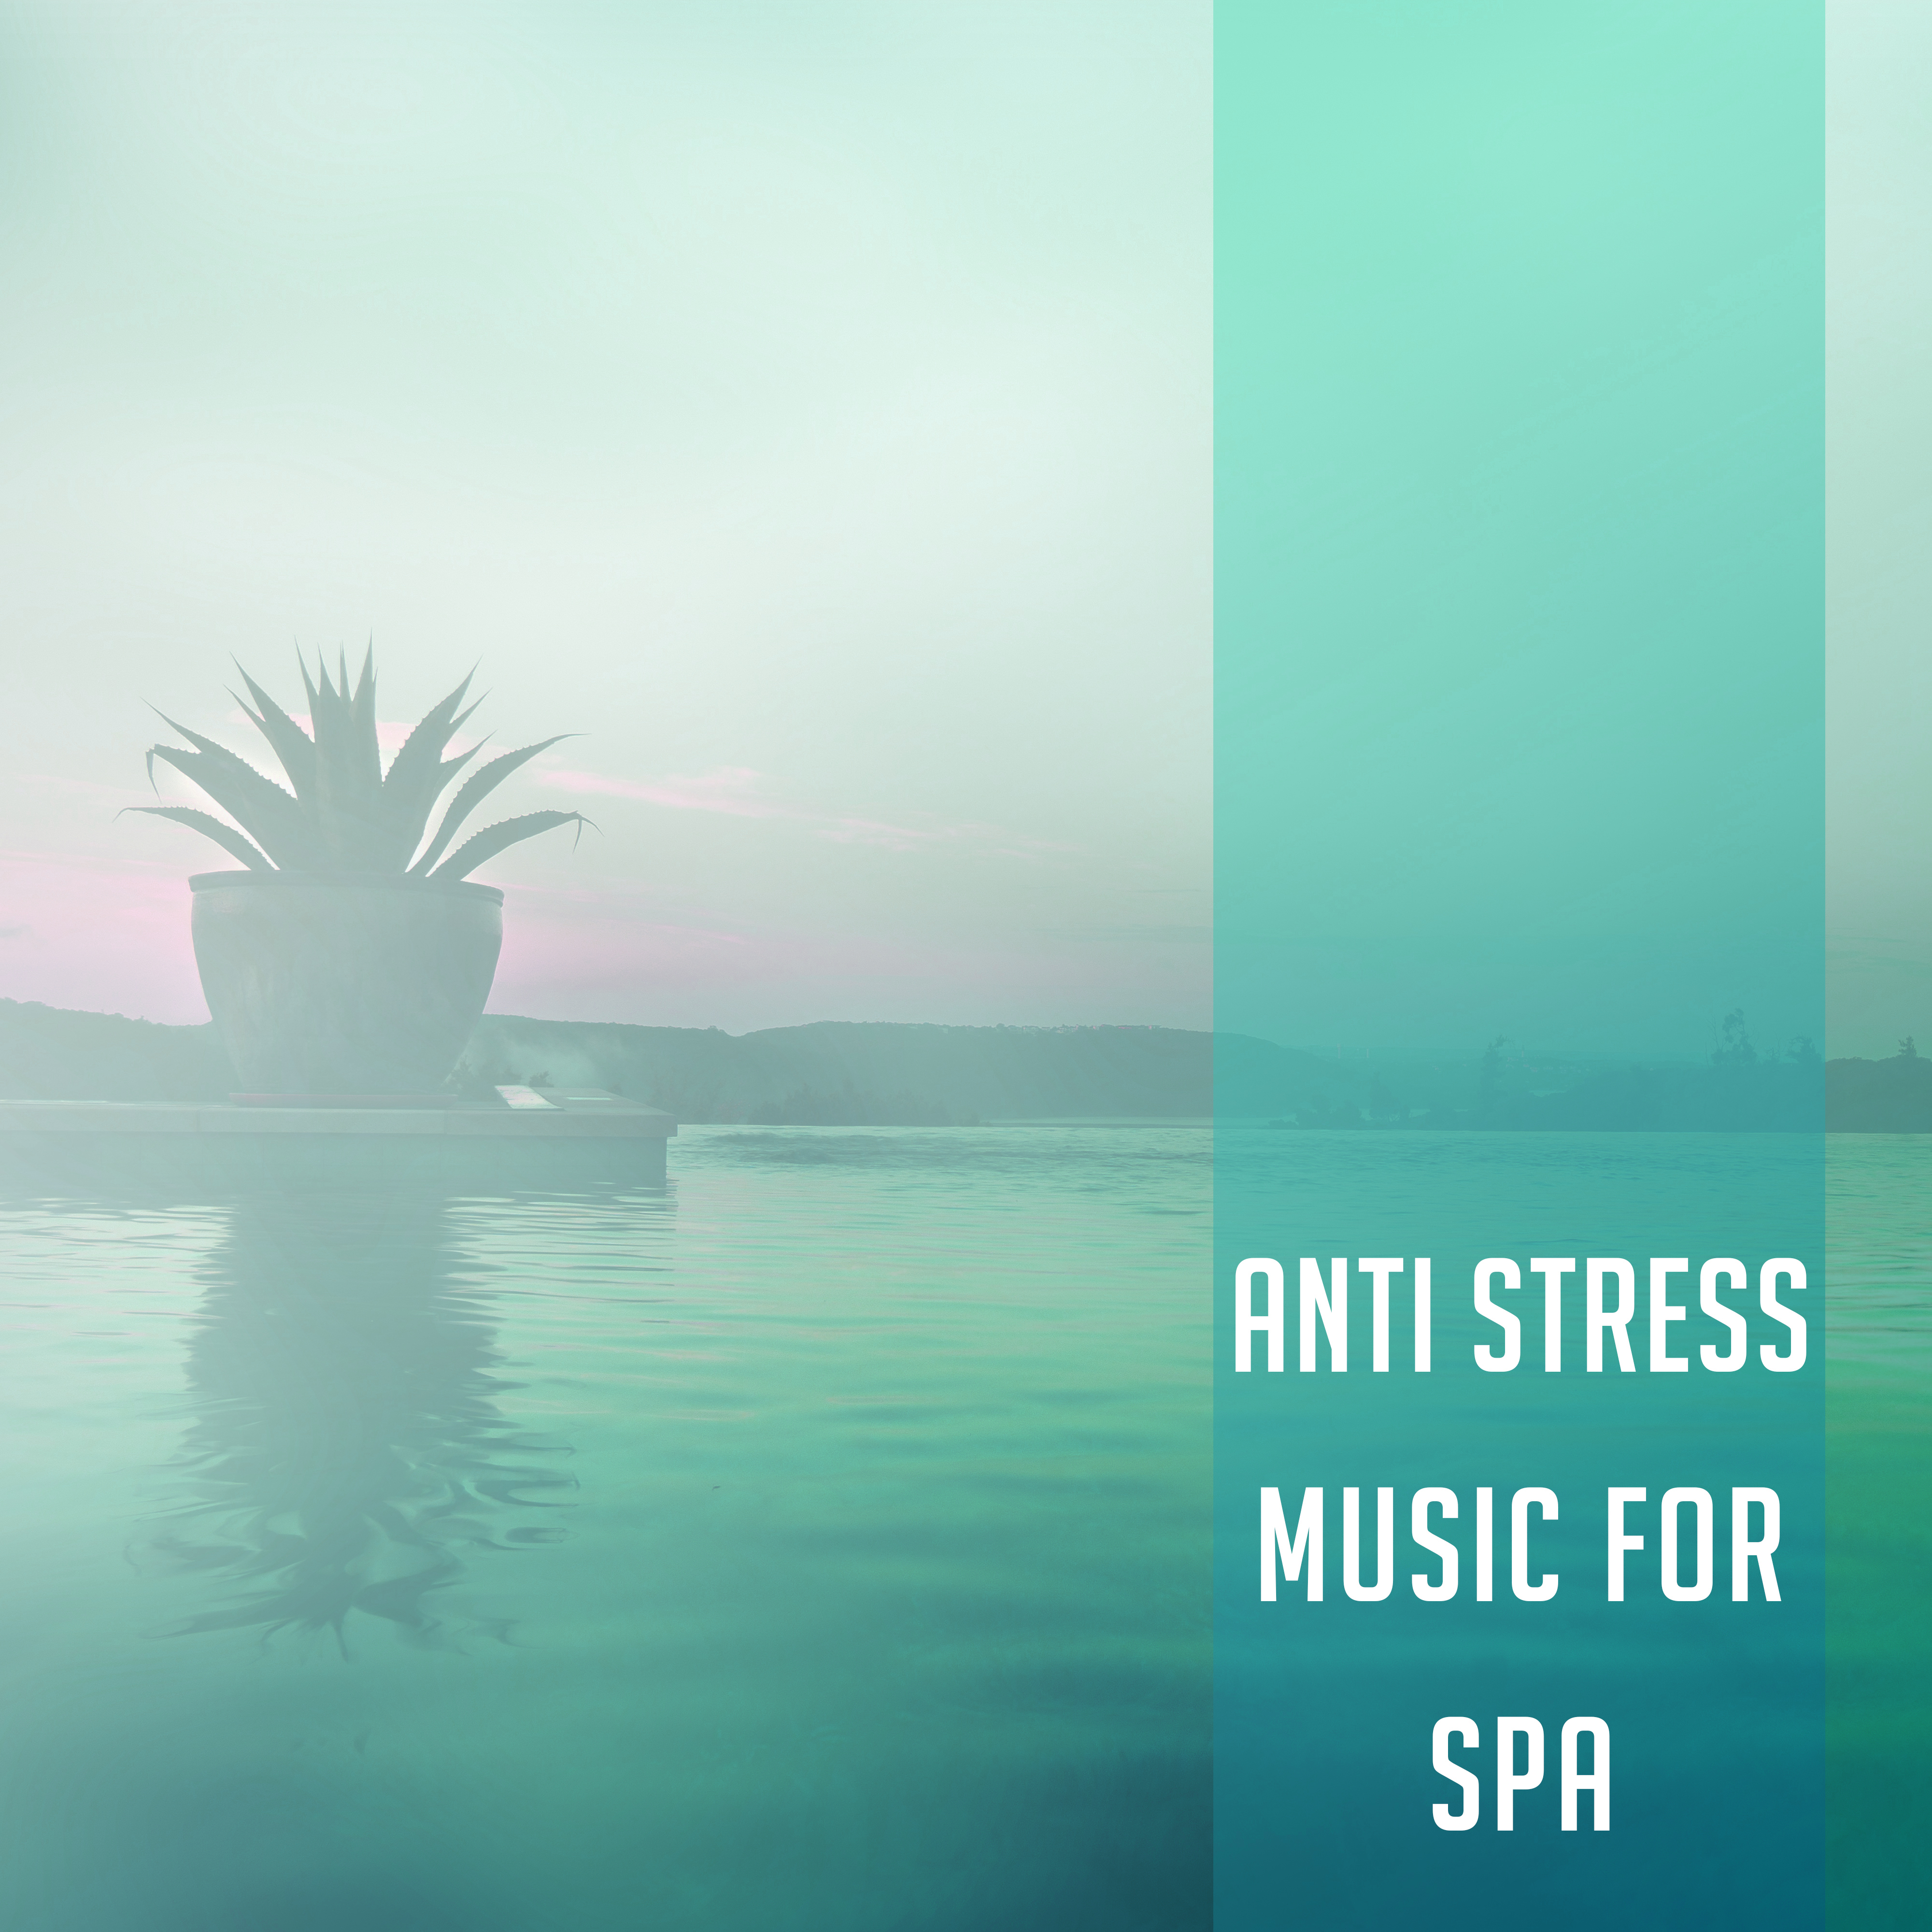 Anti Stress Music for Spa – Peaceful Nature Sounds for Relaxation, Beauty, Pure Massage, Calm Down, Therapy Music